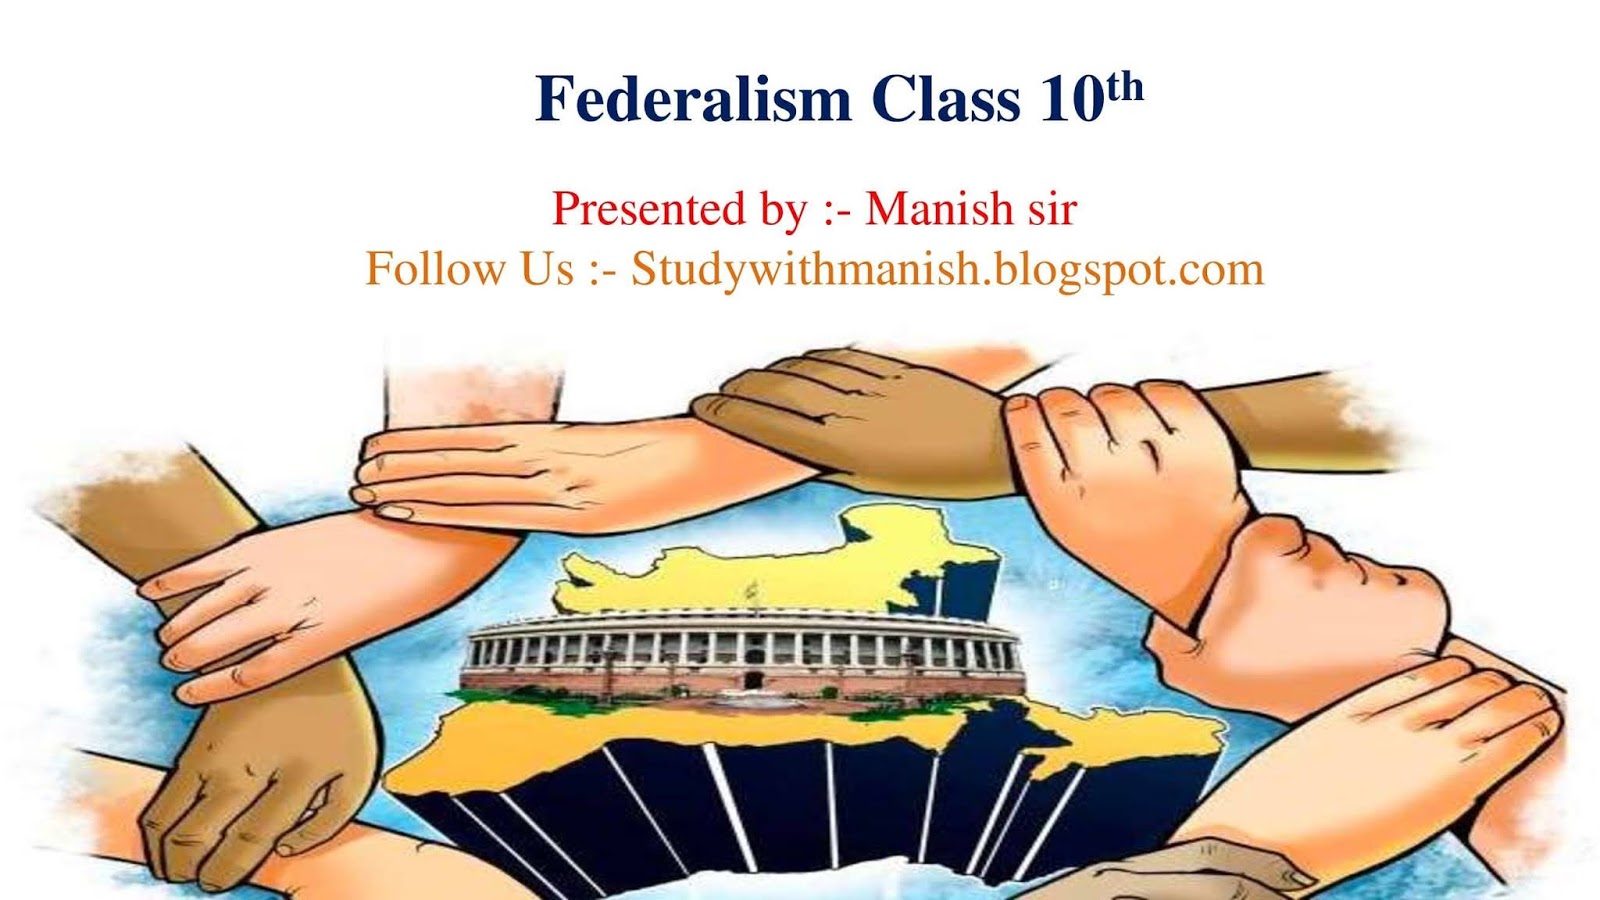 case study questions on federalism class 10